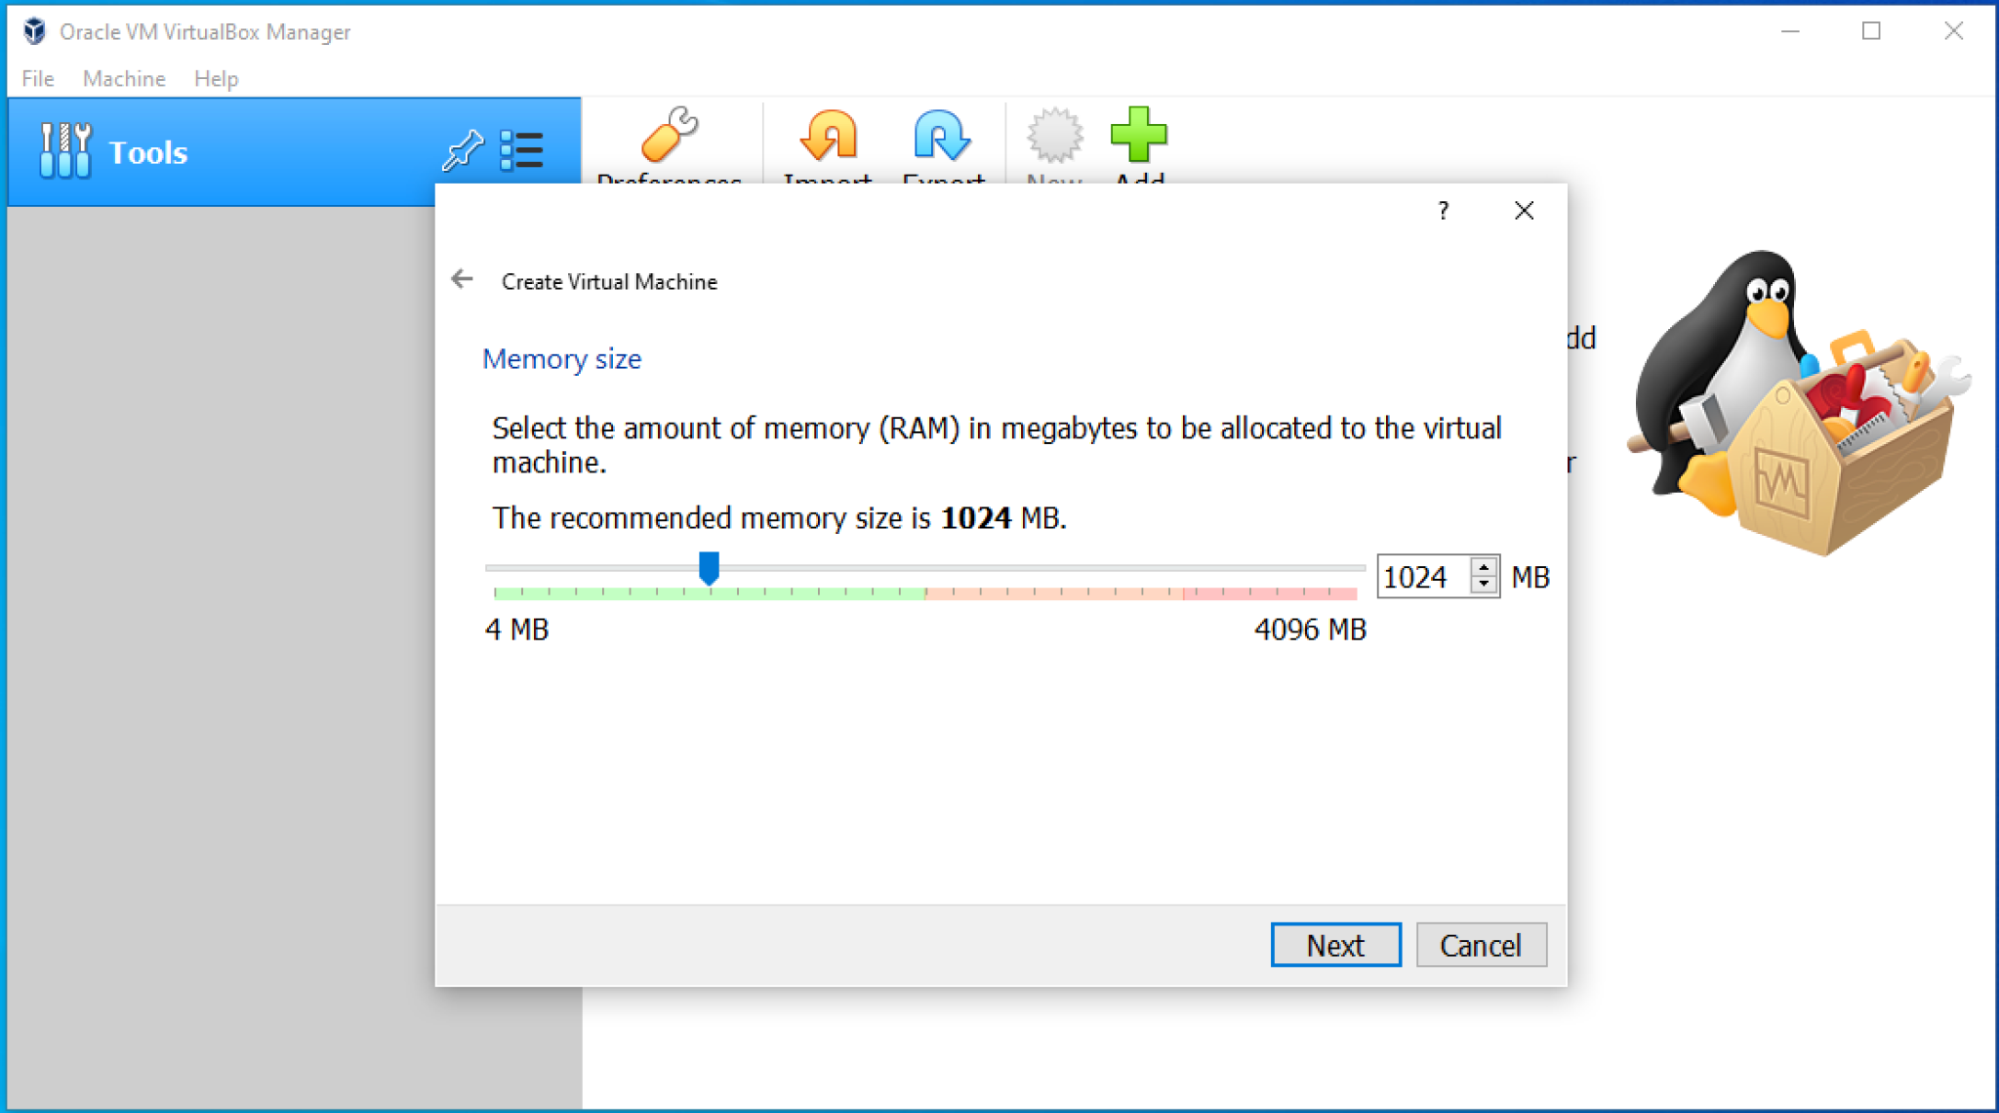 The next screen asks to adjust the RAM memory size on a sliding scale